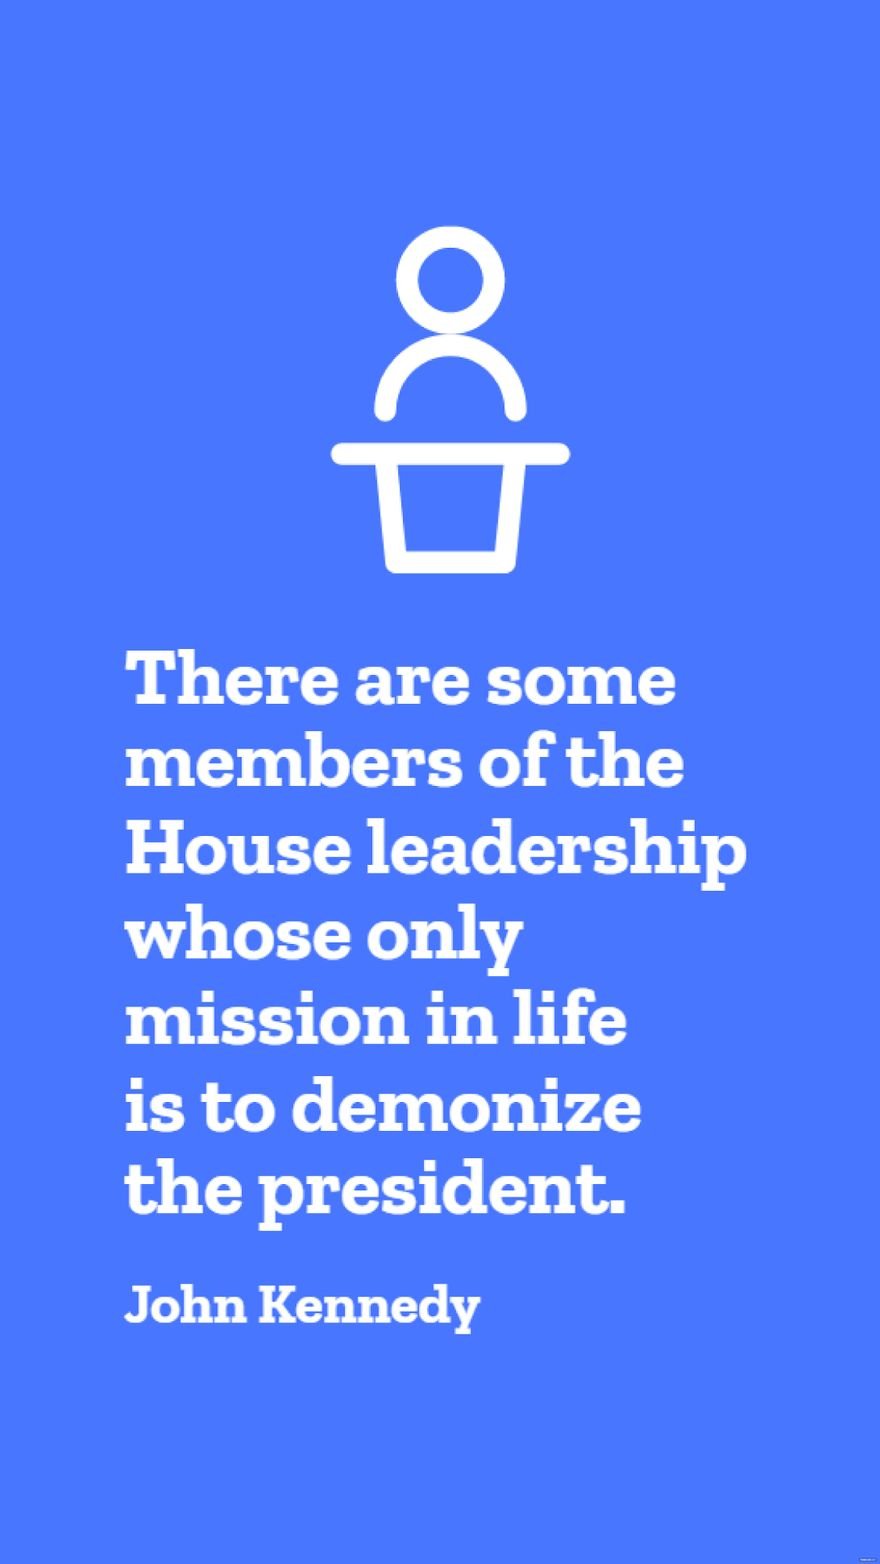 John Kennedy - There are some members of the House leadership whose only mission in life is to demonize the president.